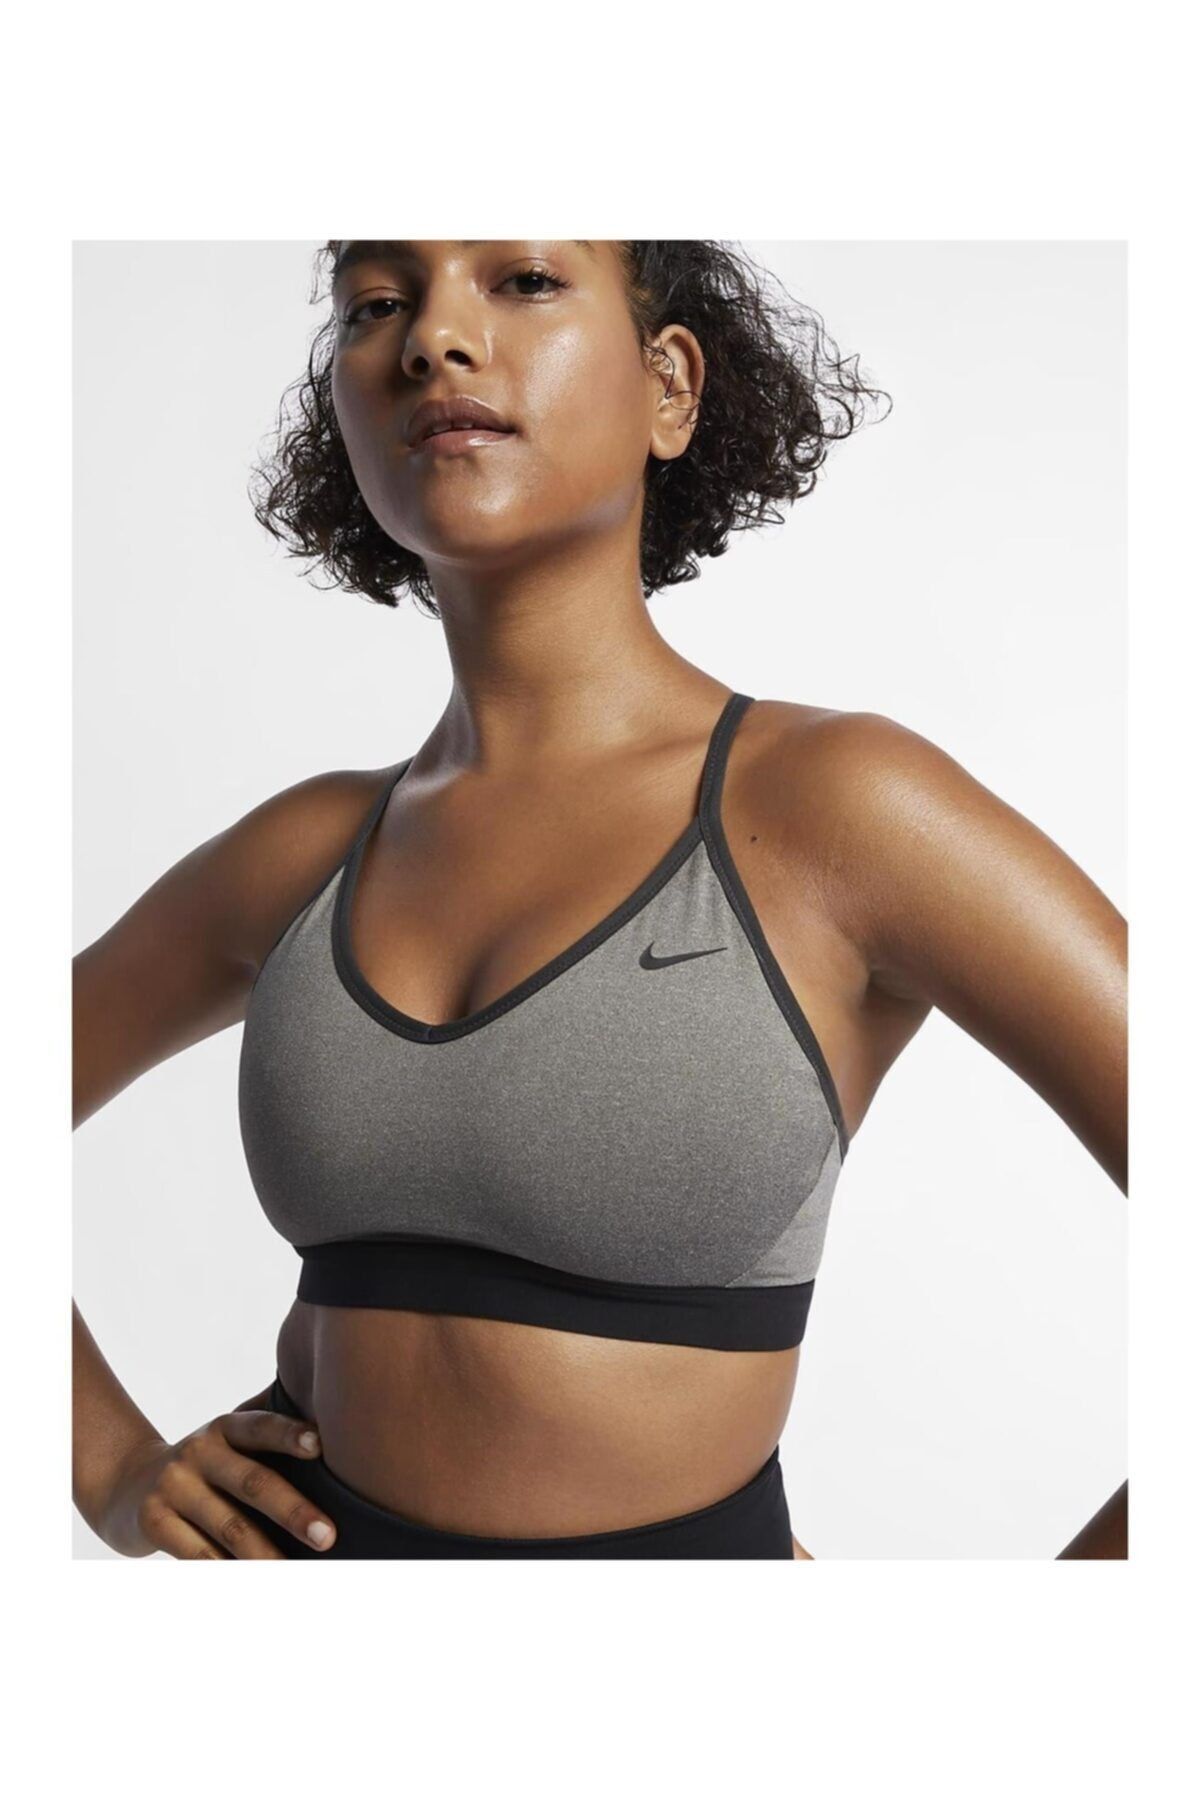 Nike Indy Sports Bra in Oil Green Matcha [XS] - DEADSTOCK, Women's Fashion,  Activewear on Carousell